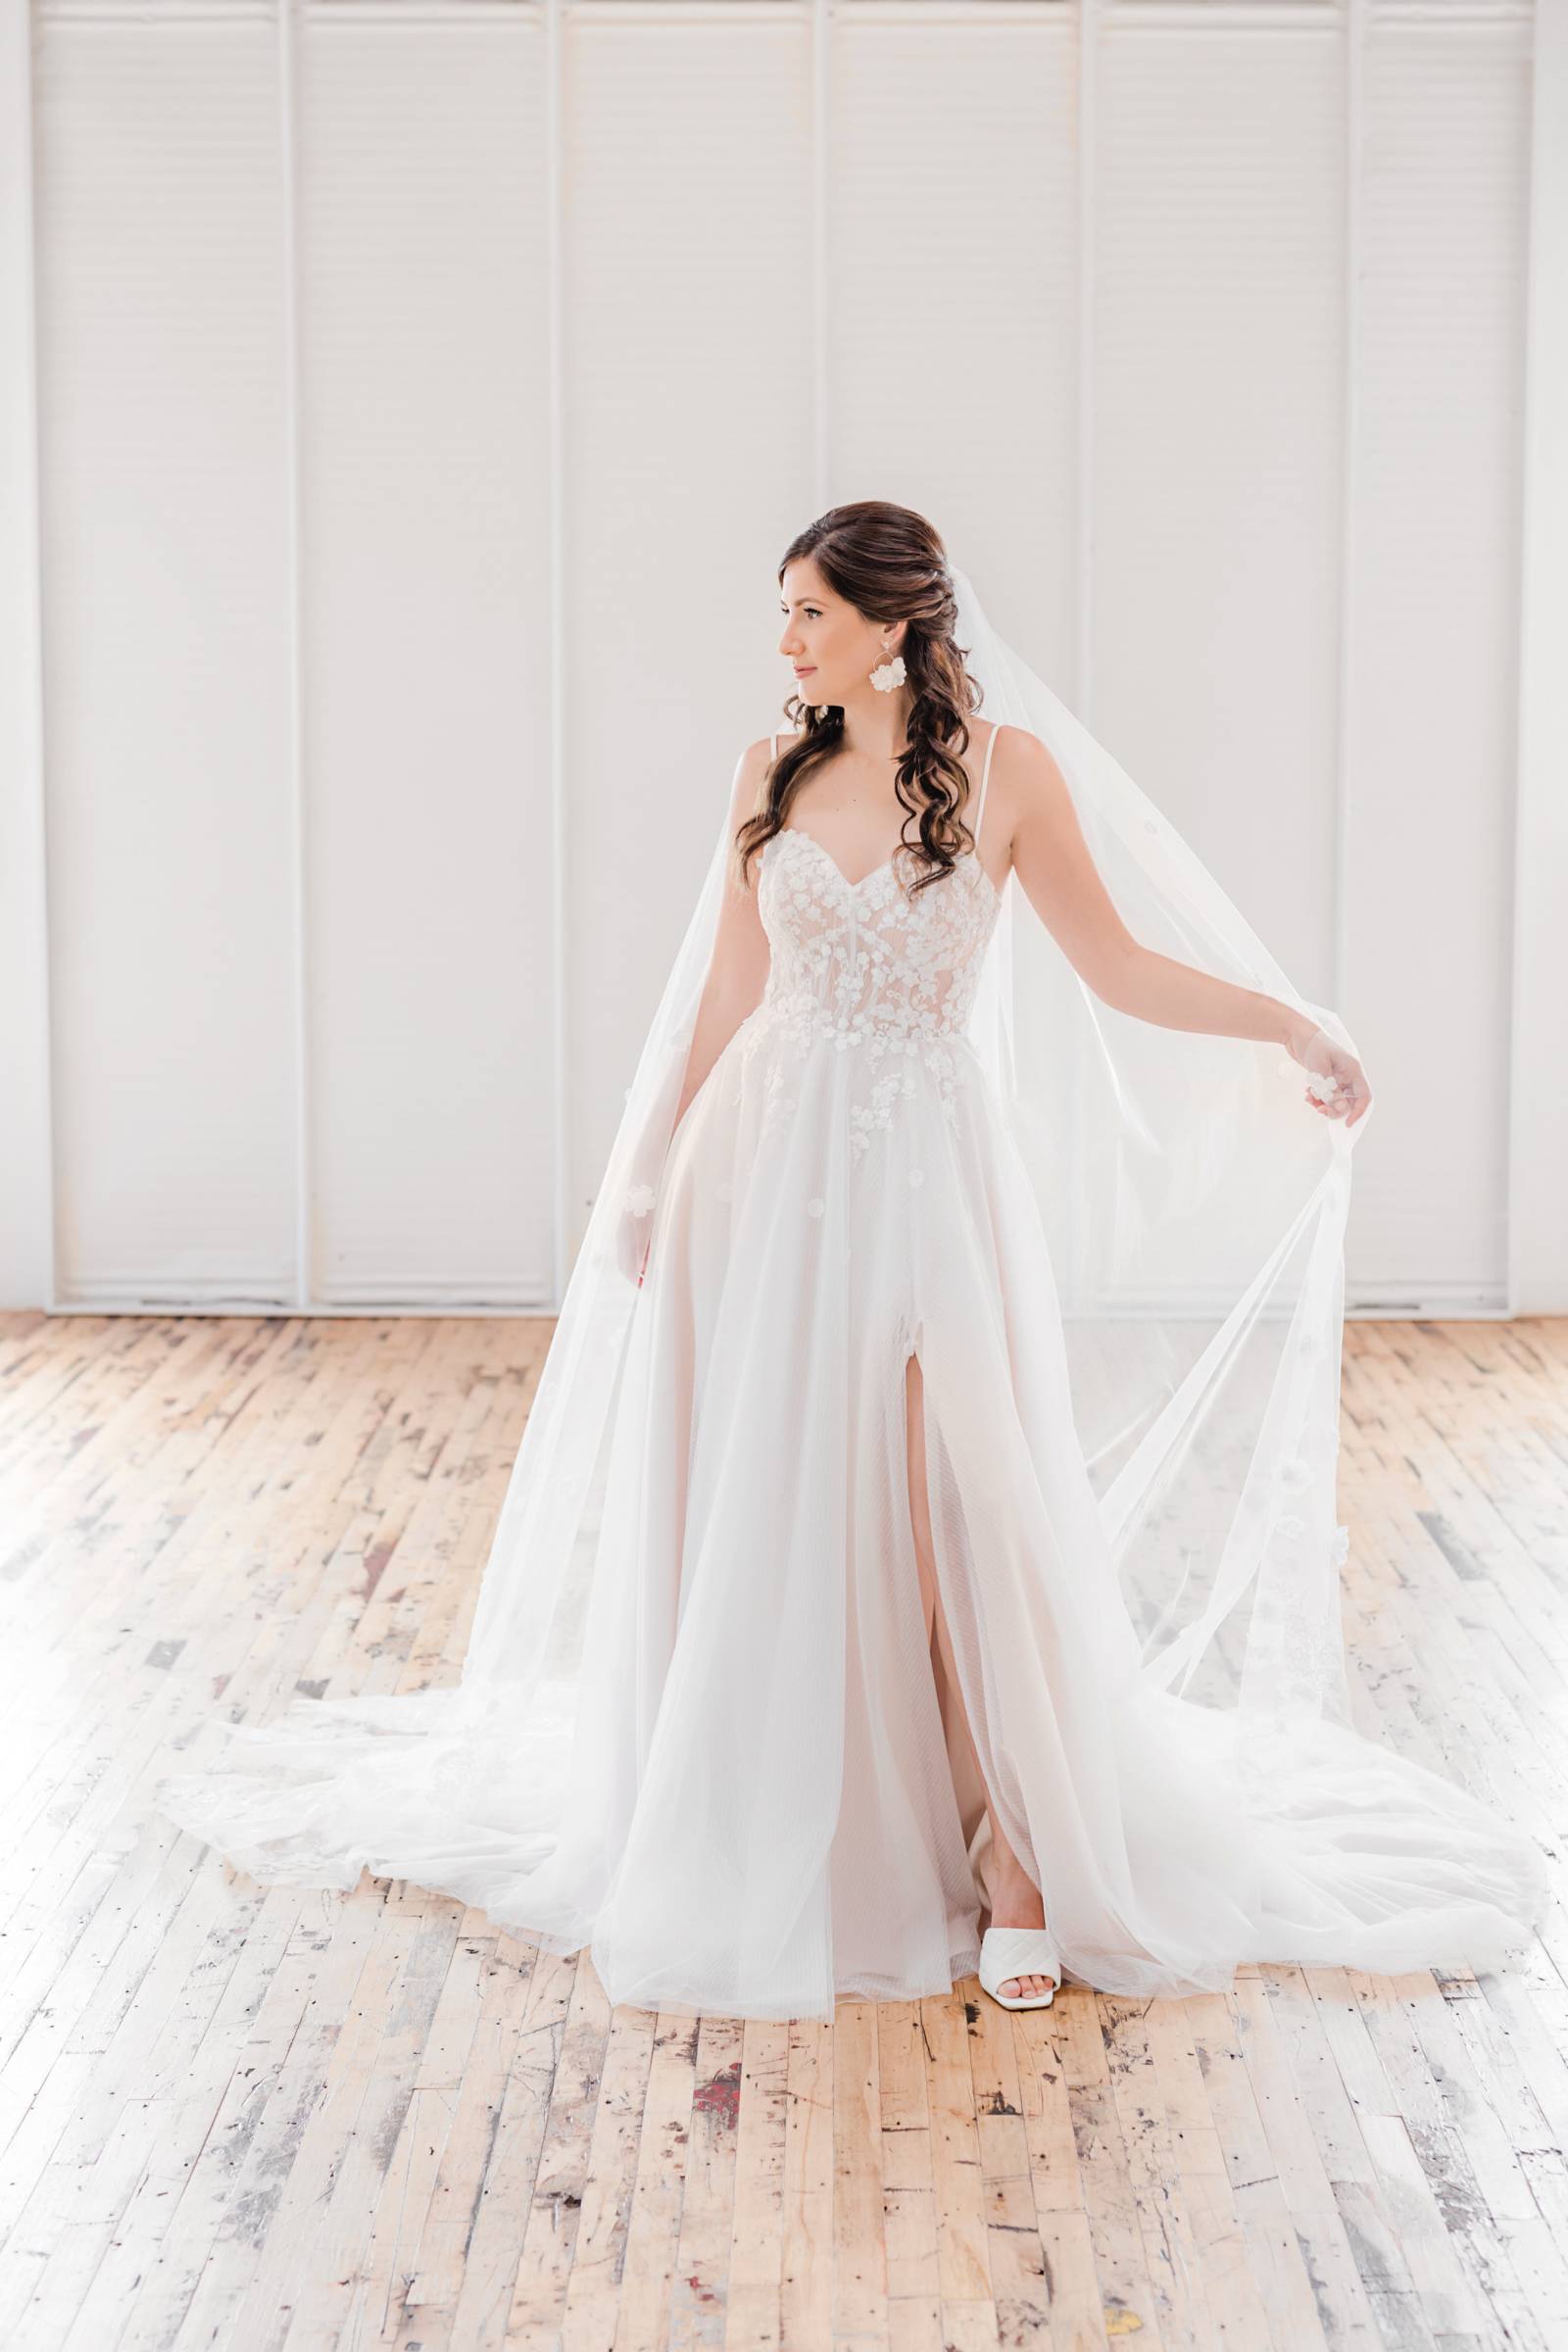 Timeless Classic Romantic Bridal Gown